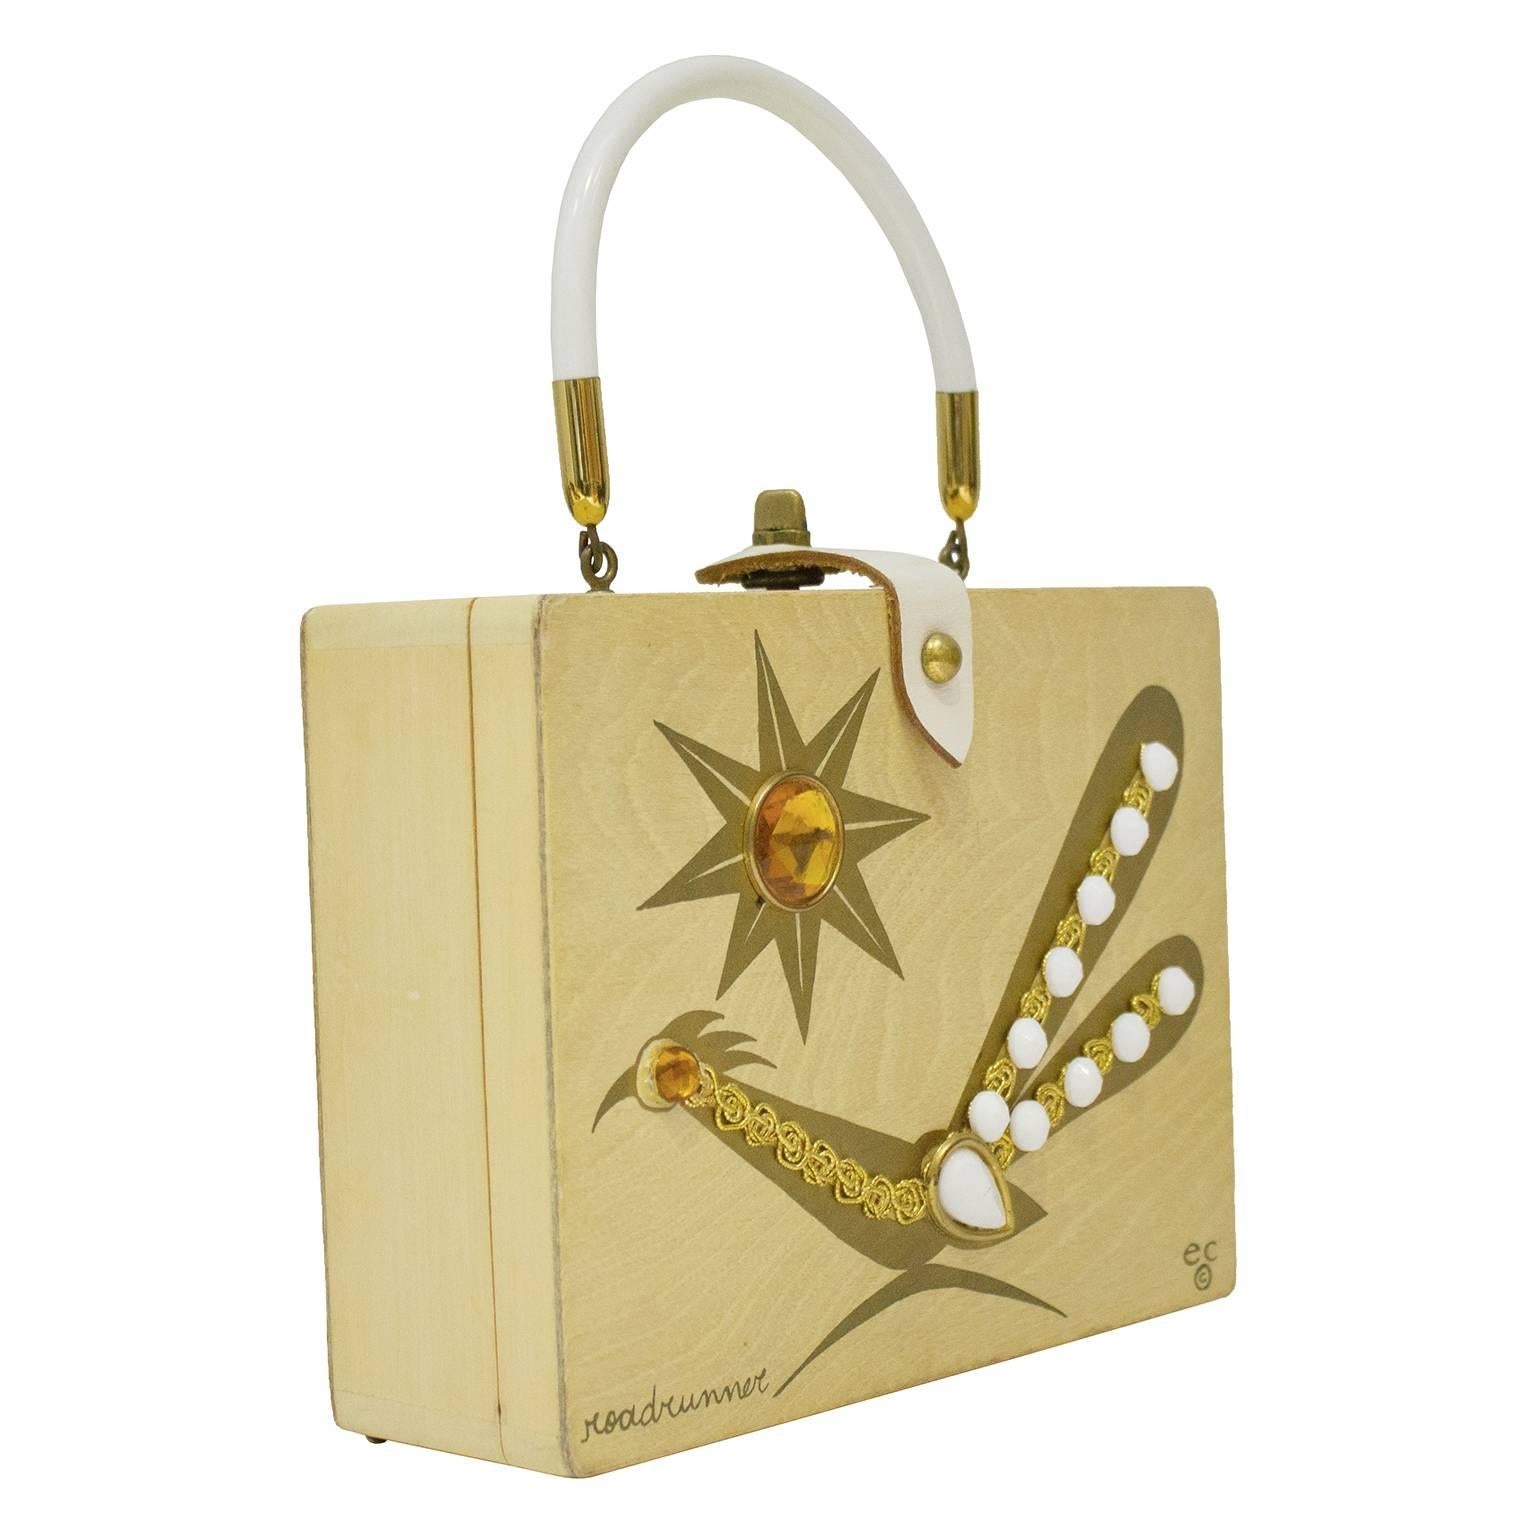 1960's Enid Collins/Collins of Texas light wooden square top handle bag. The bag features a Roadrunner and a star on the front adorned with gold hardware, white cabochons and amber rhinestones. Signed by Enid Collins on the front, the interior has a